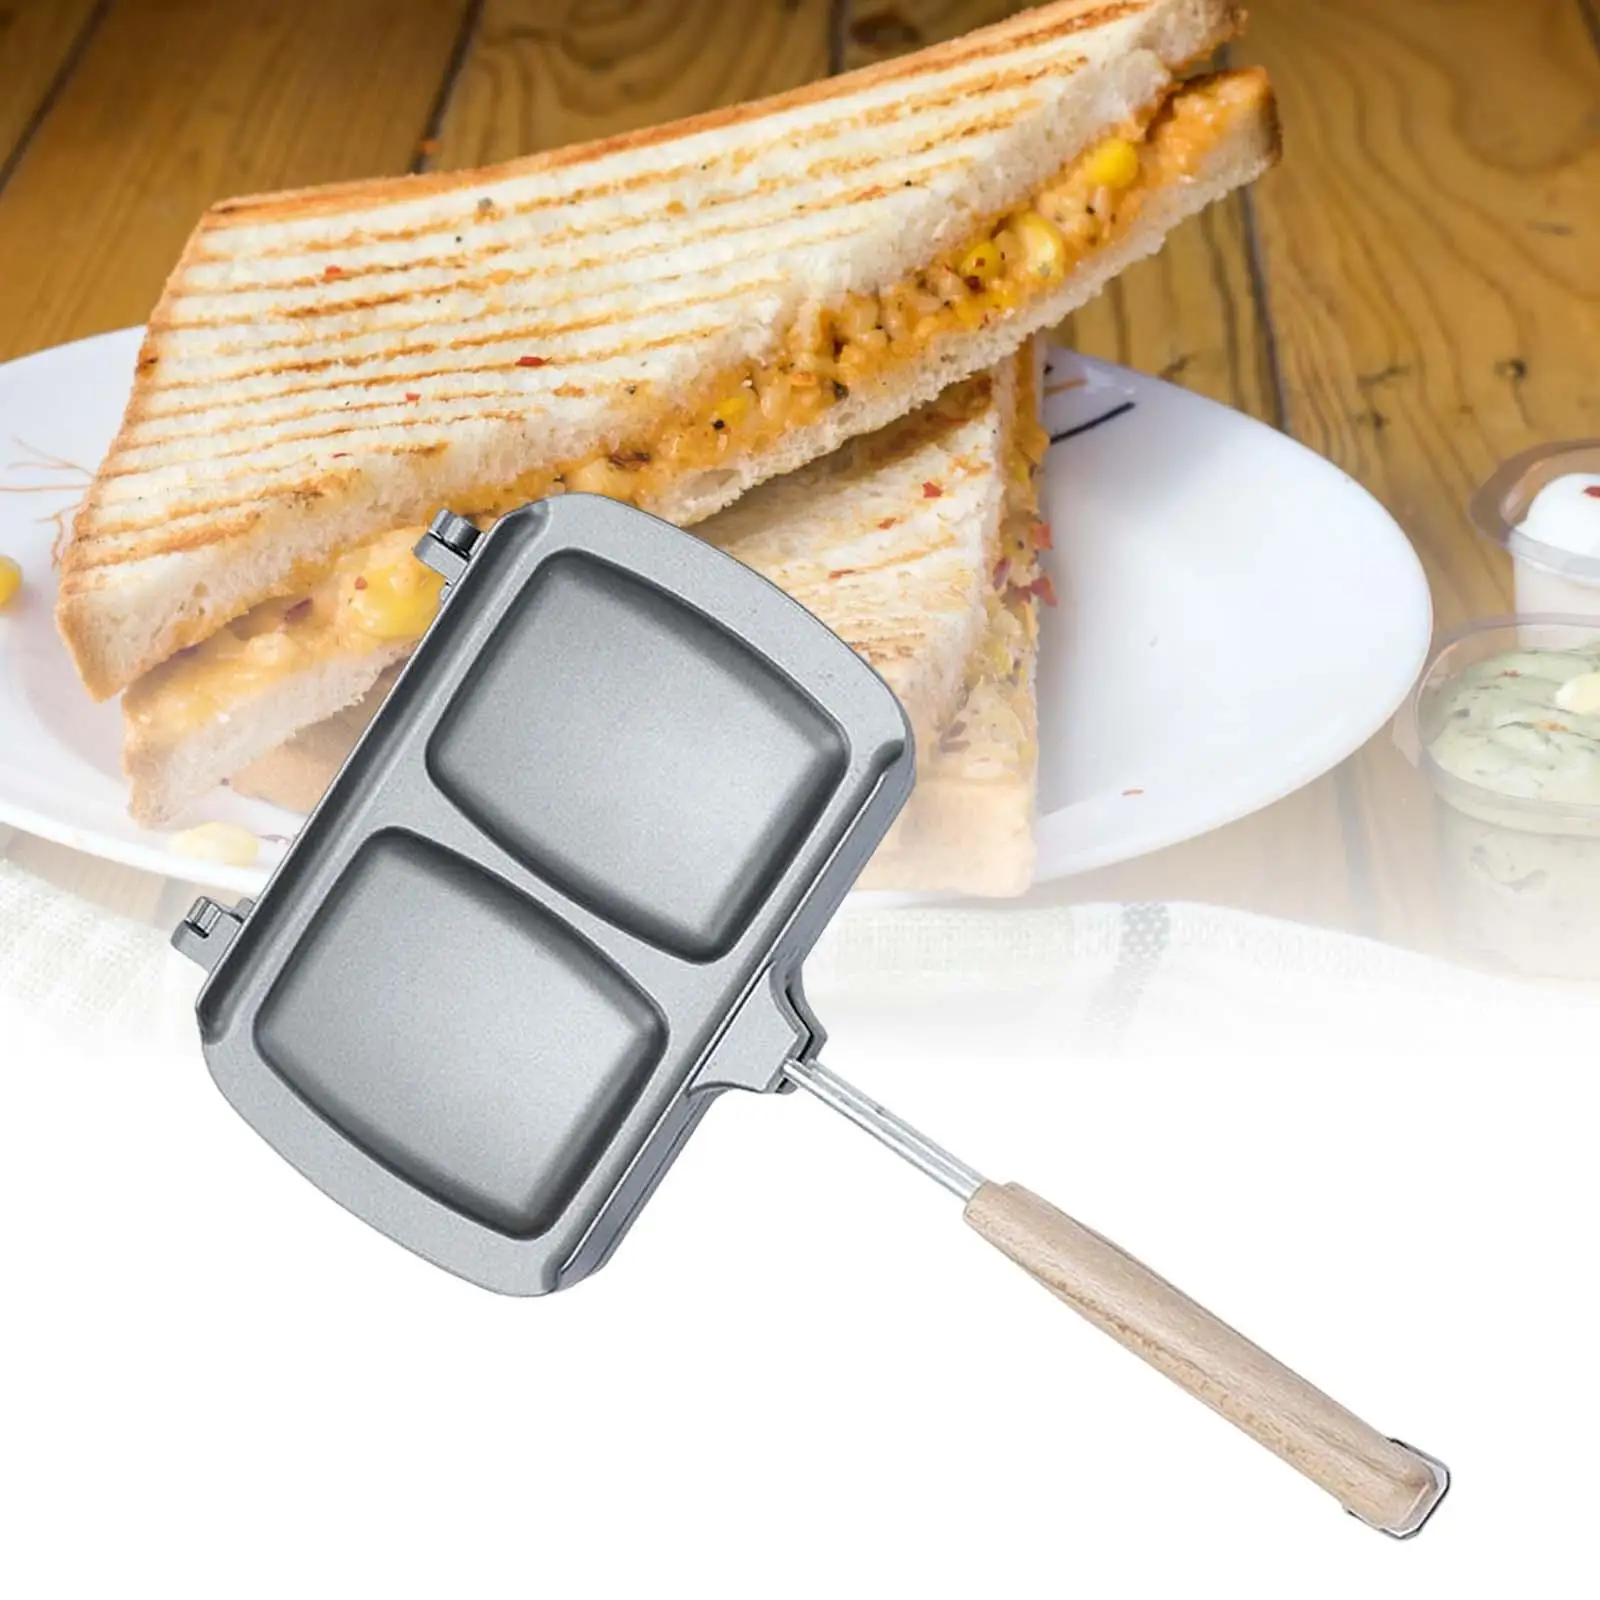 Bread Toast Maker Non Stick Grill Pan Double Sided Heating Frying Egg Ham Sandwiches Maker for Induction Cooker Stove Top electric frying pan multi functional household large capacity cooking one piece pot fire non stick cooker